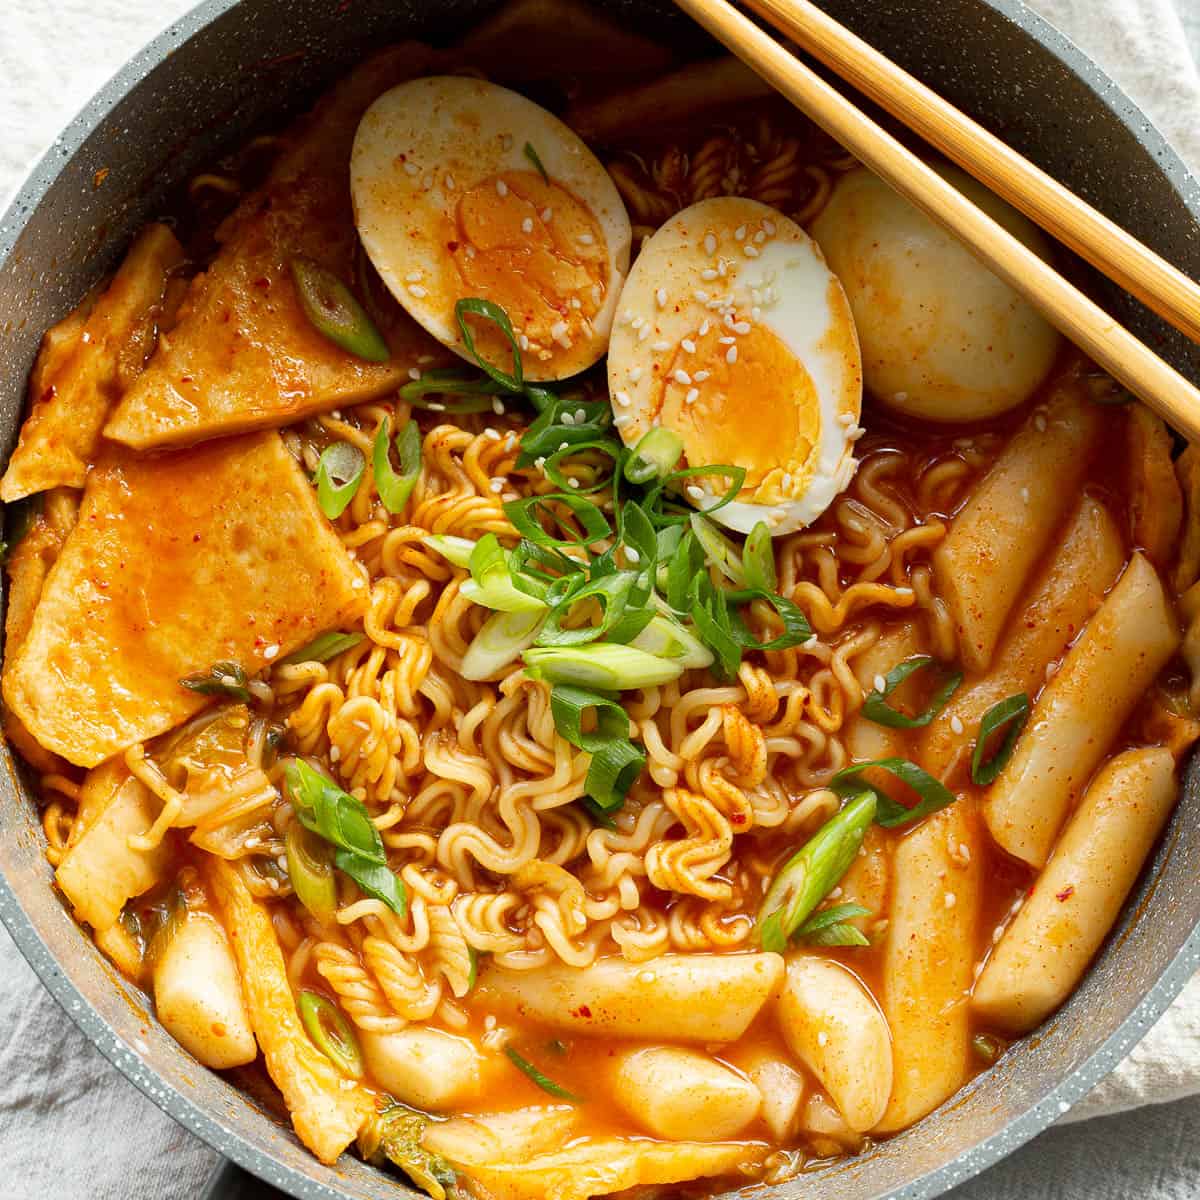 A saucepan filled with rabokki favourites including fish cakes, egg, rice cakes and ramen.